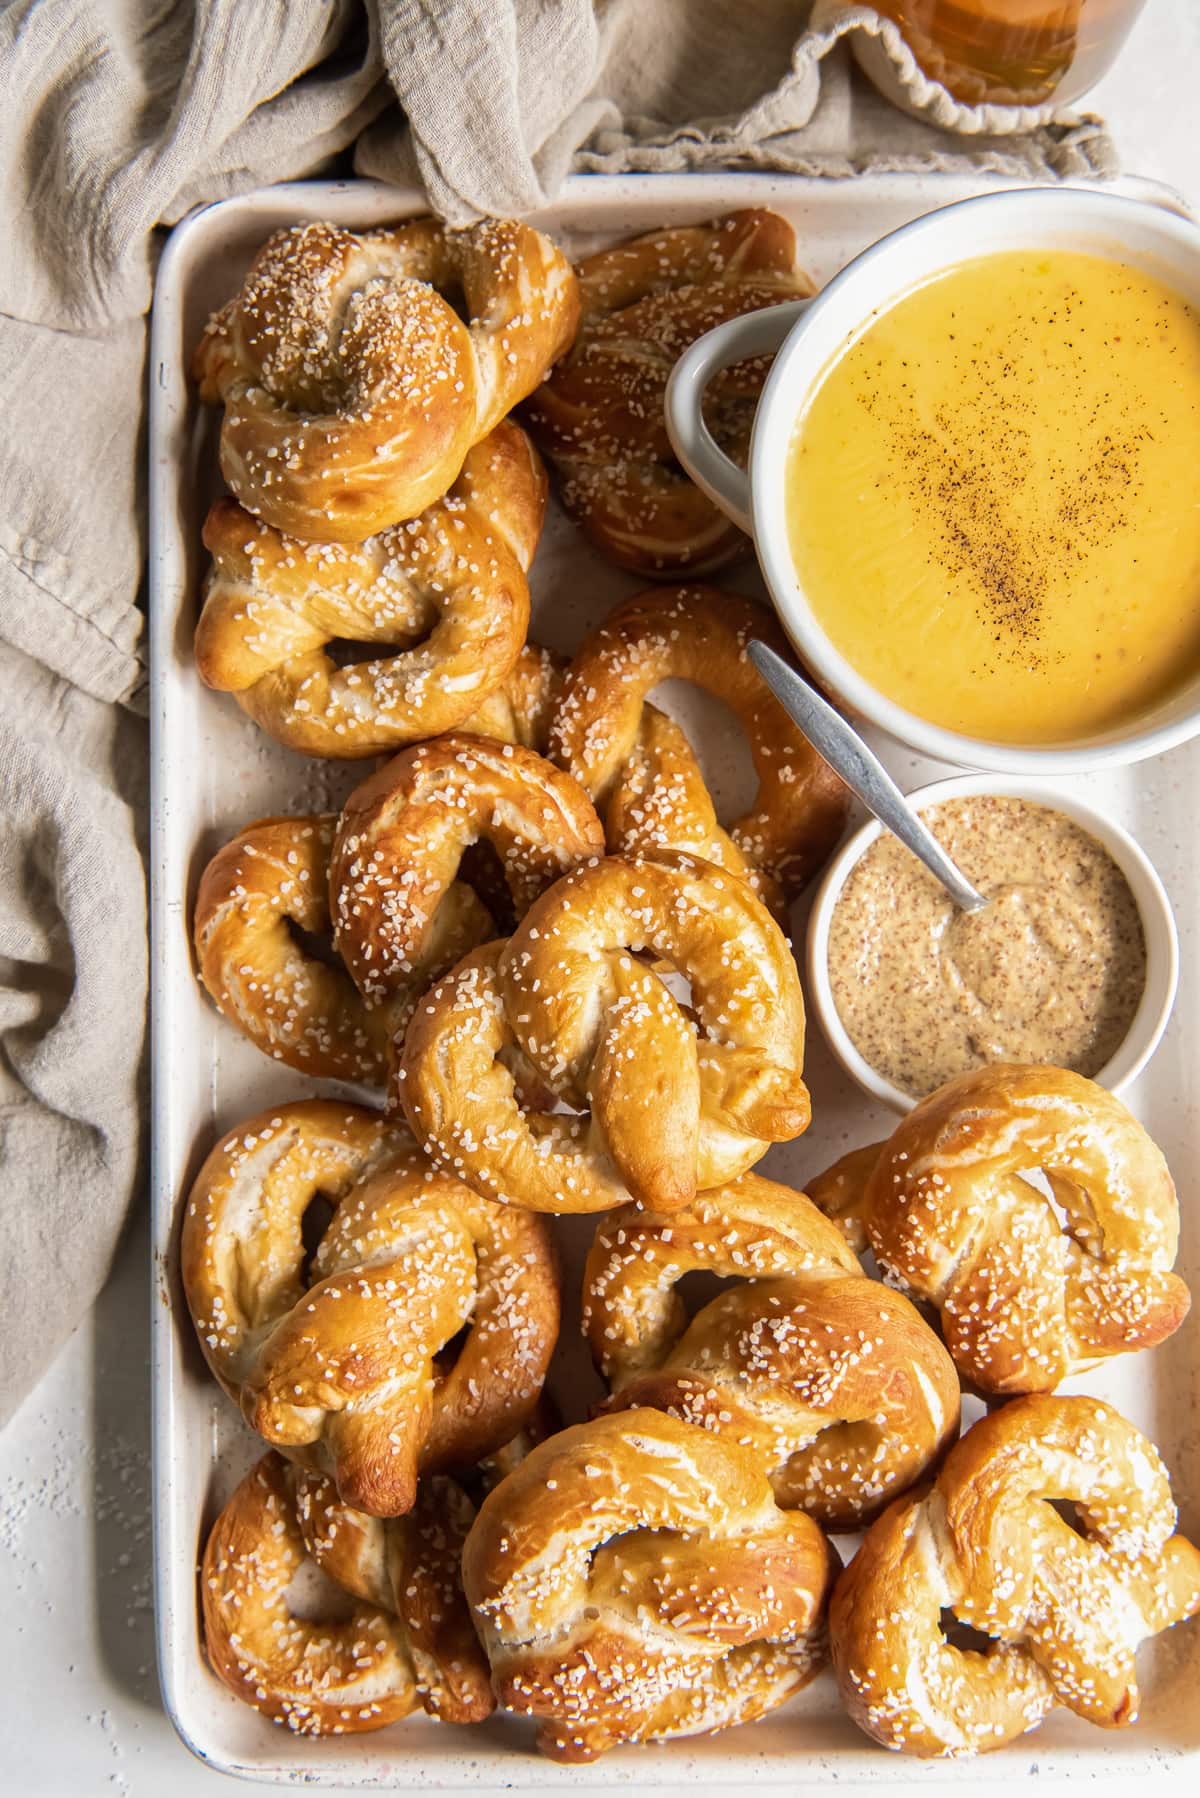 soft pretzels on baking sheet with bowl of beer cheese dip and bowl of mustard.